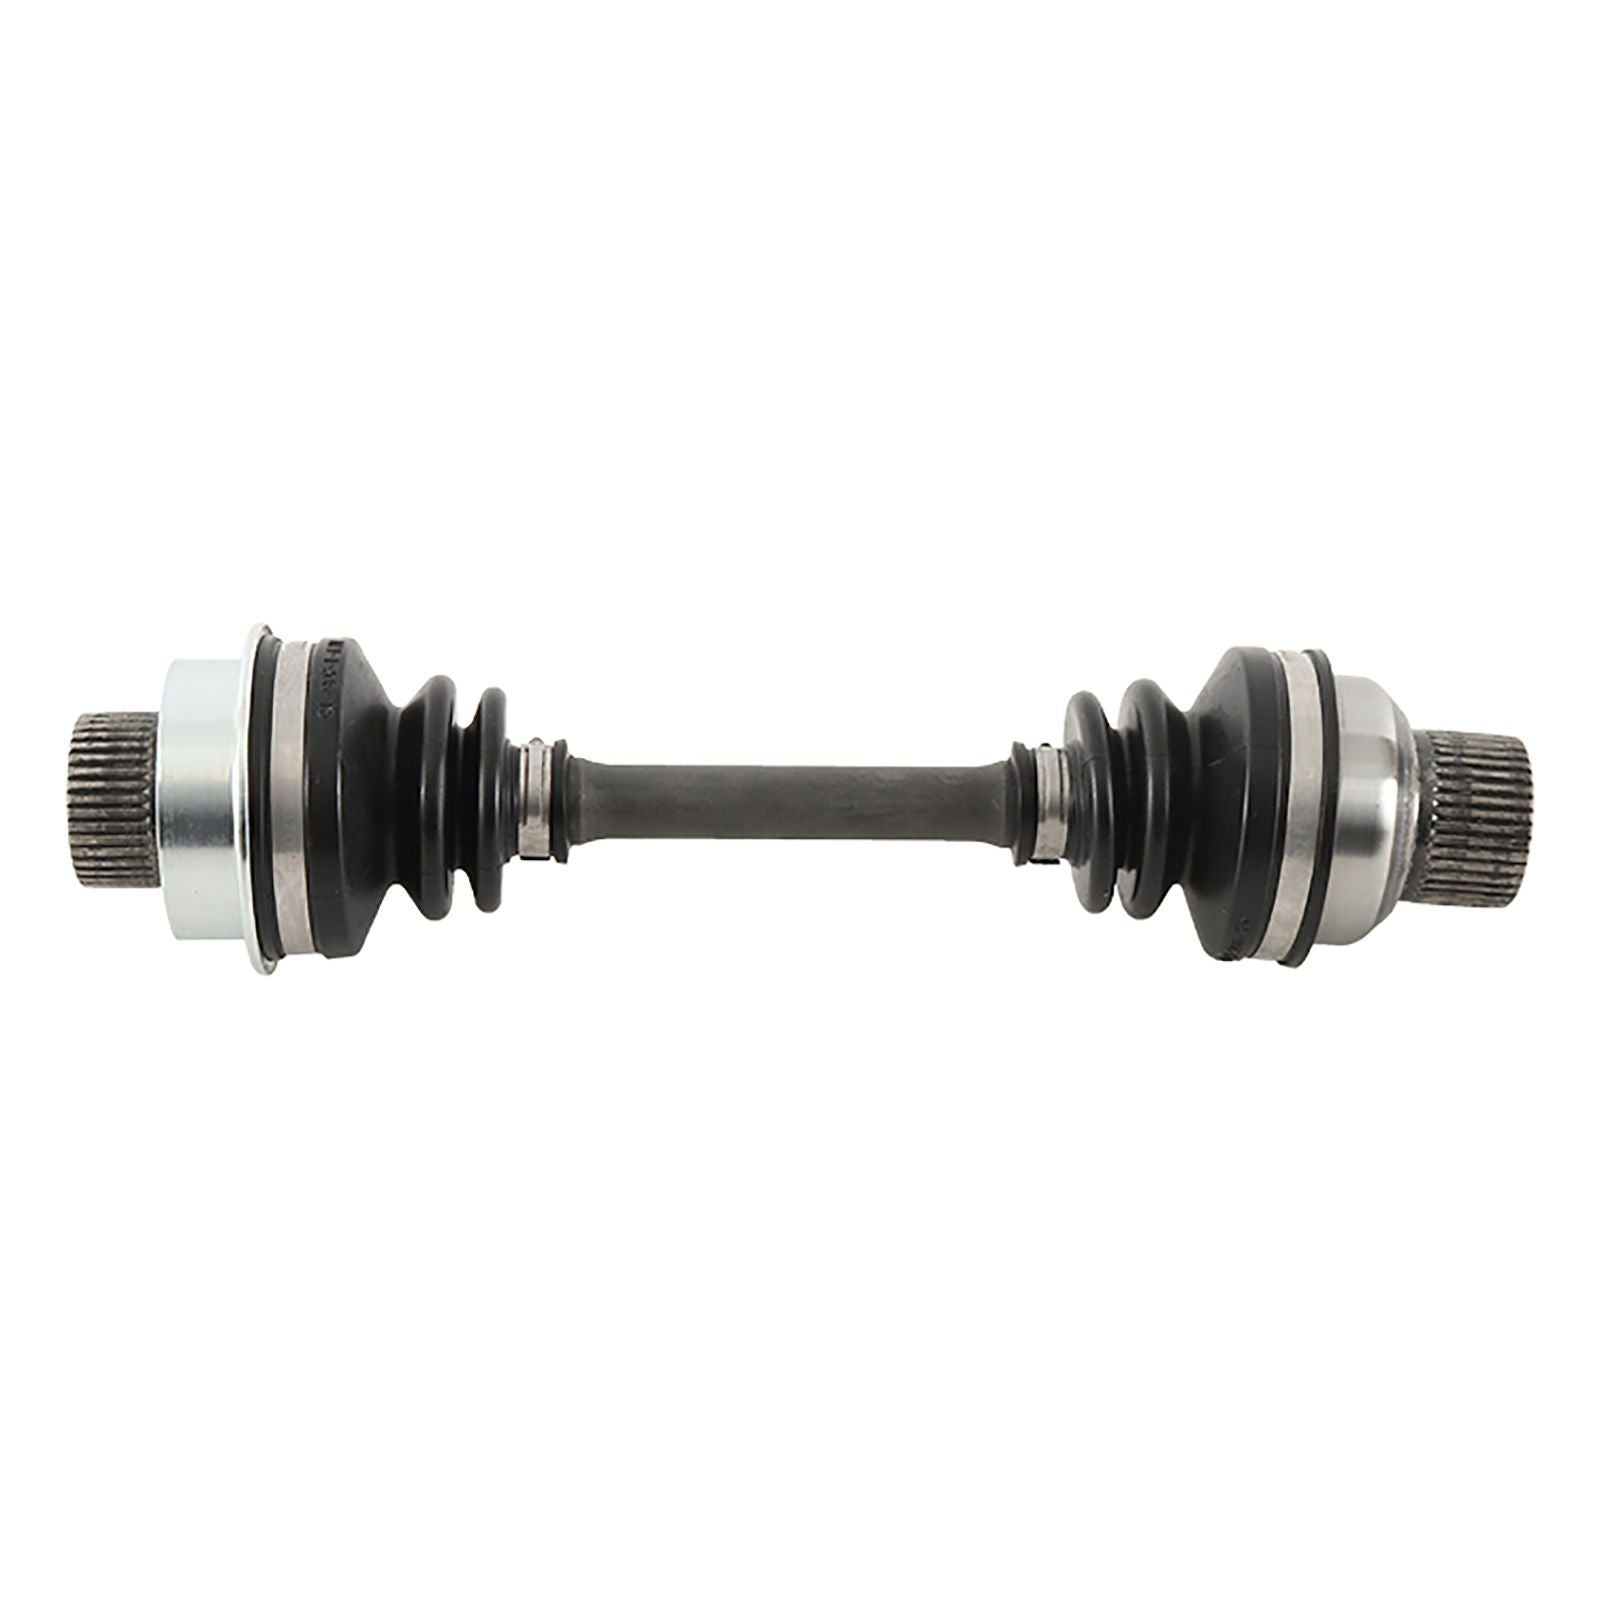 New ALL BALLS Racing ATV Driveshaft - Front (ENG TO DIFF ) #AB6YA9300